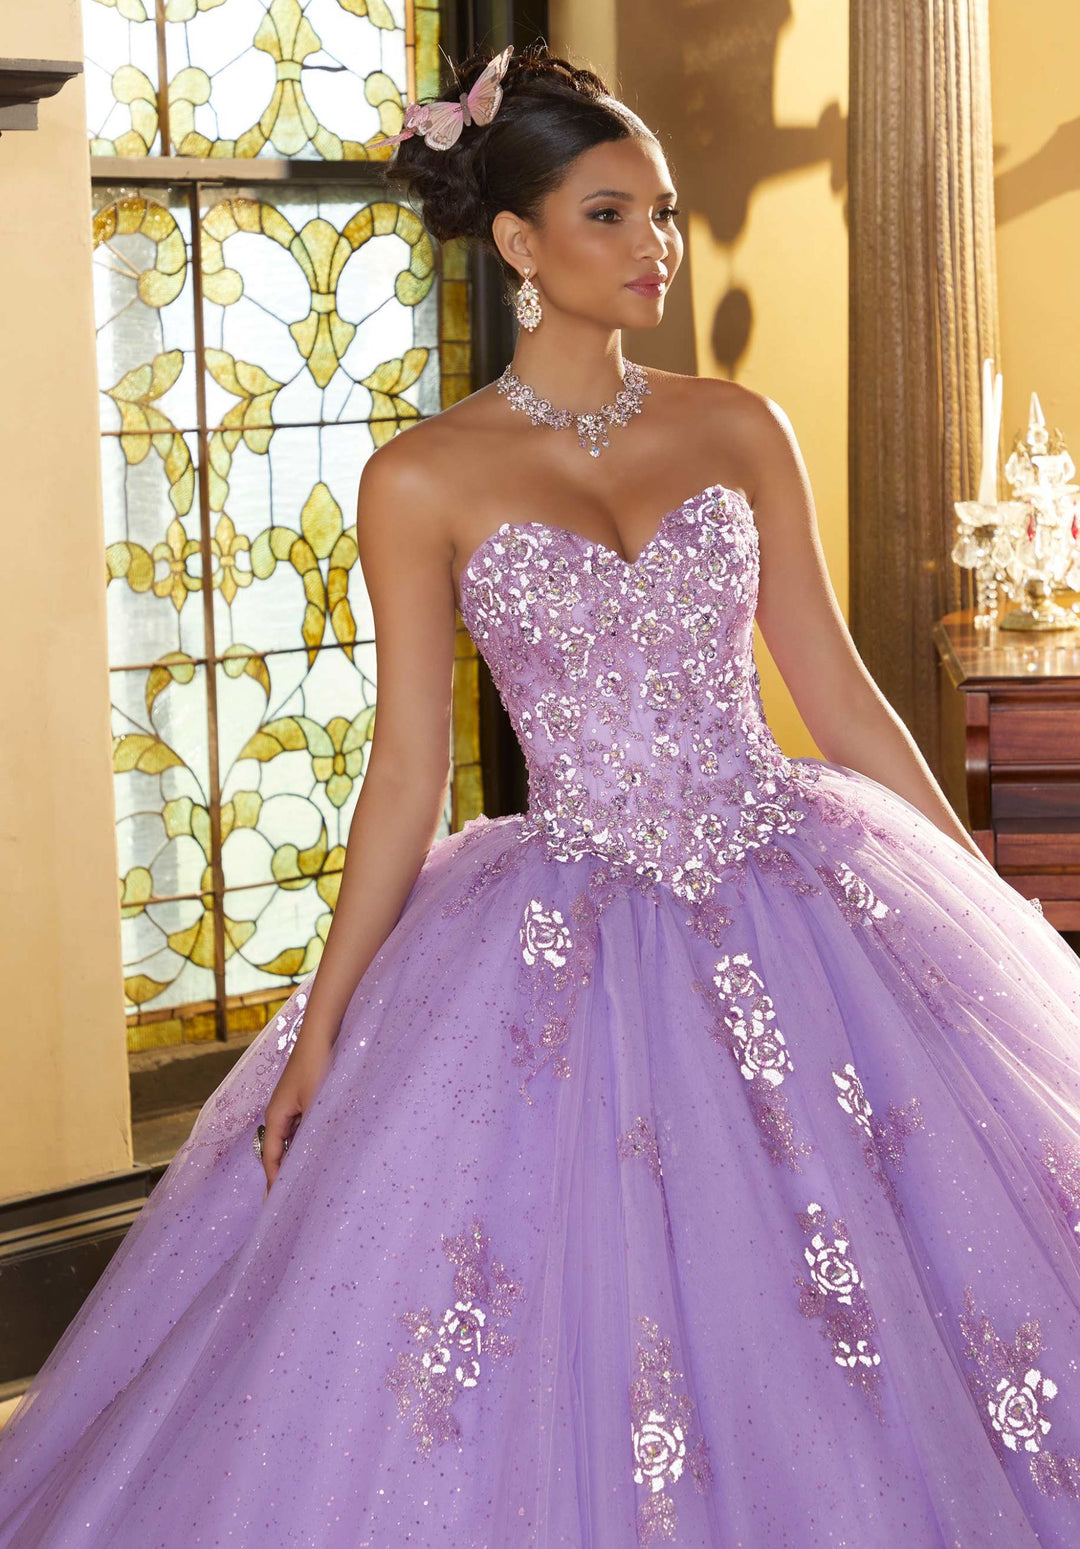 Valencia by Morilee #60152 Sparkling Appliqué on Tulle Ball Gown